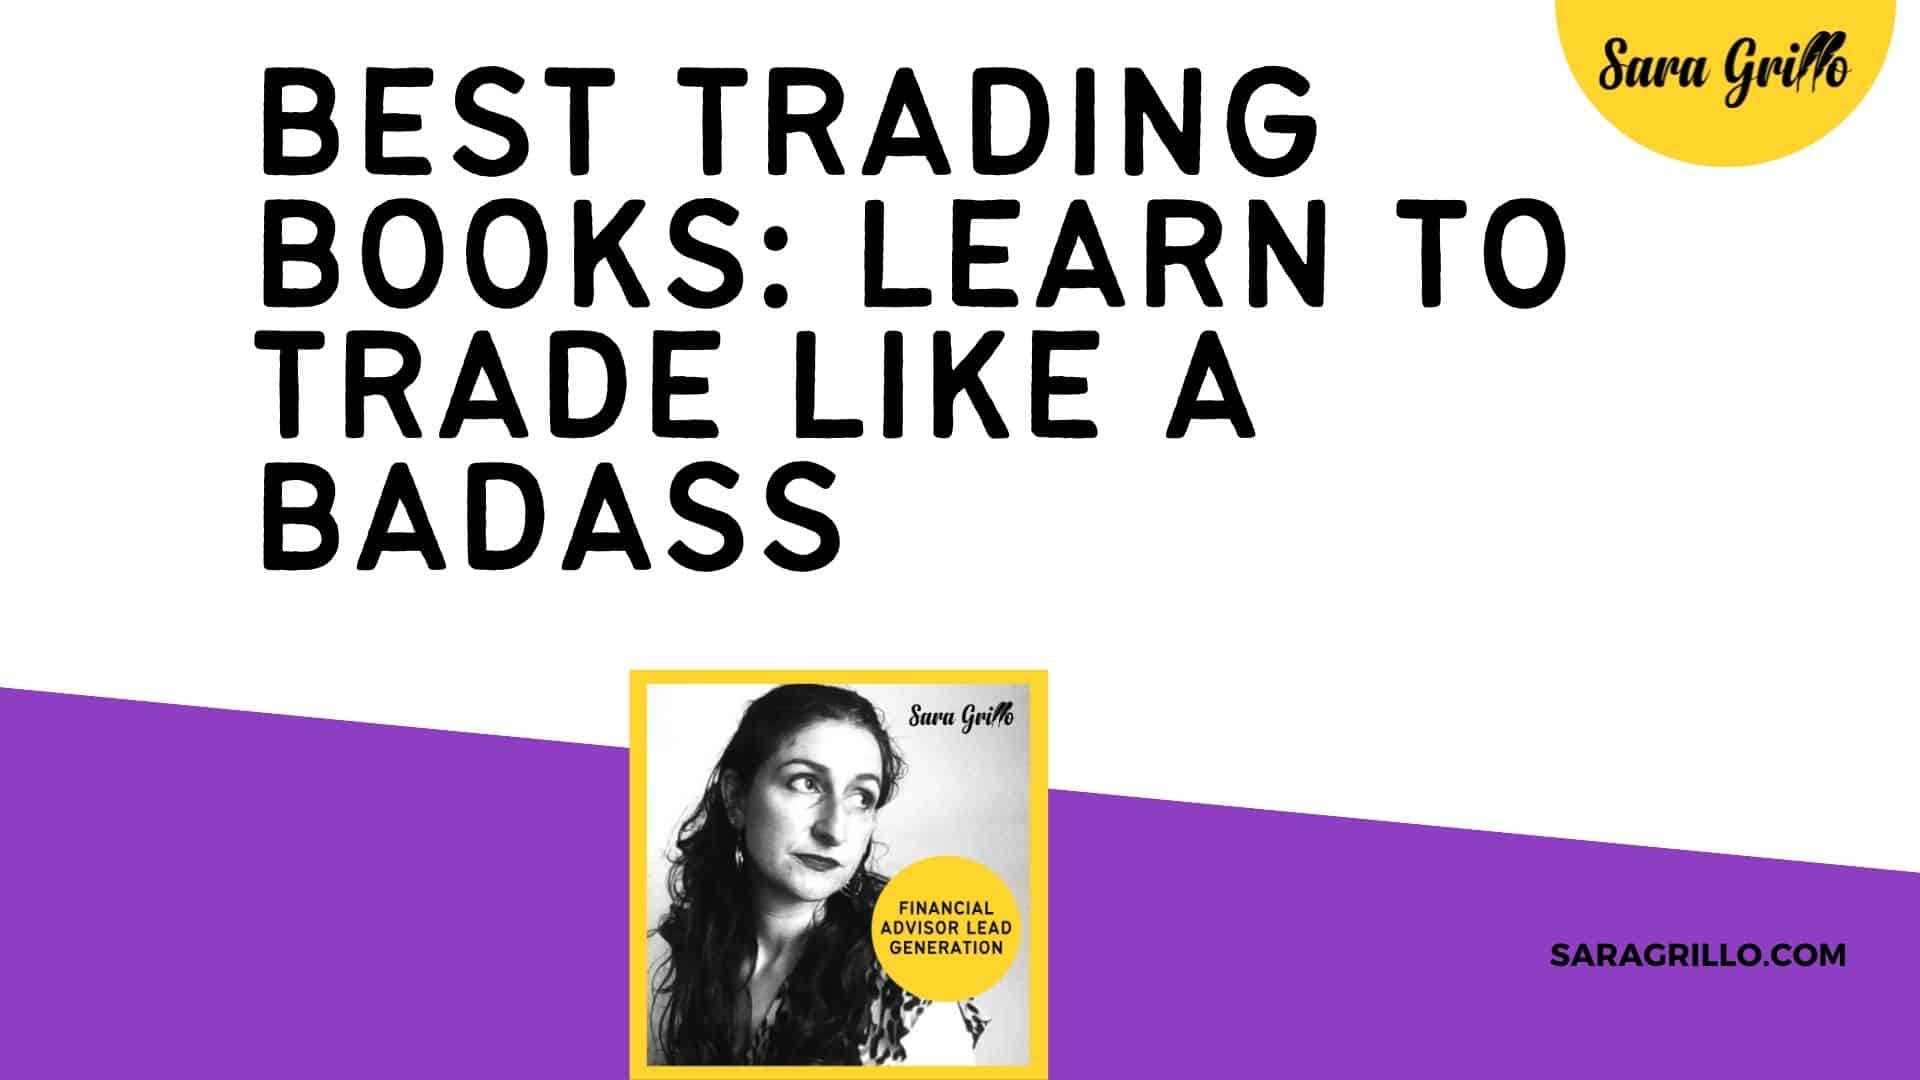 This blog talks about the best trading books.